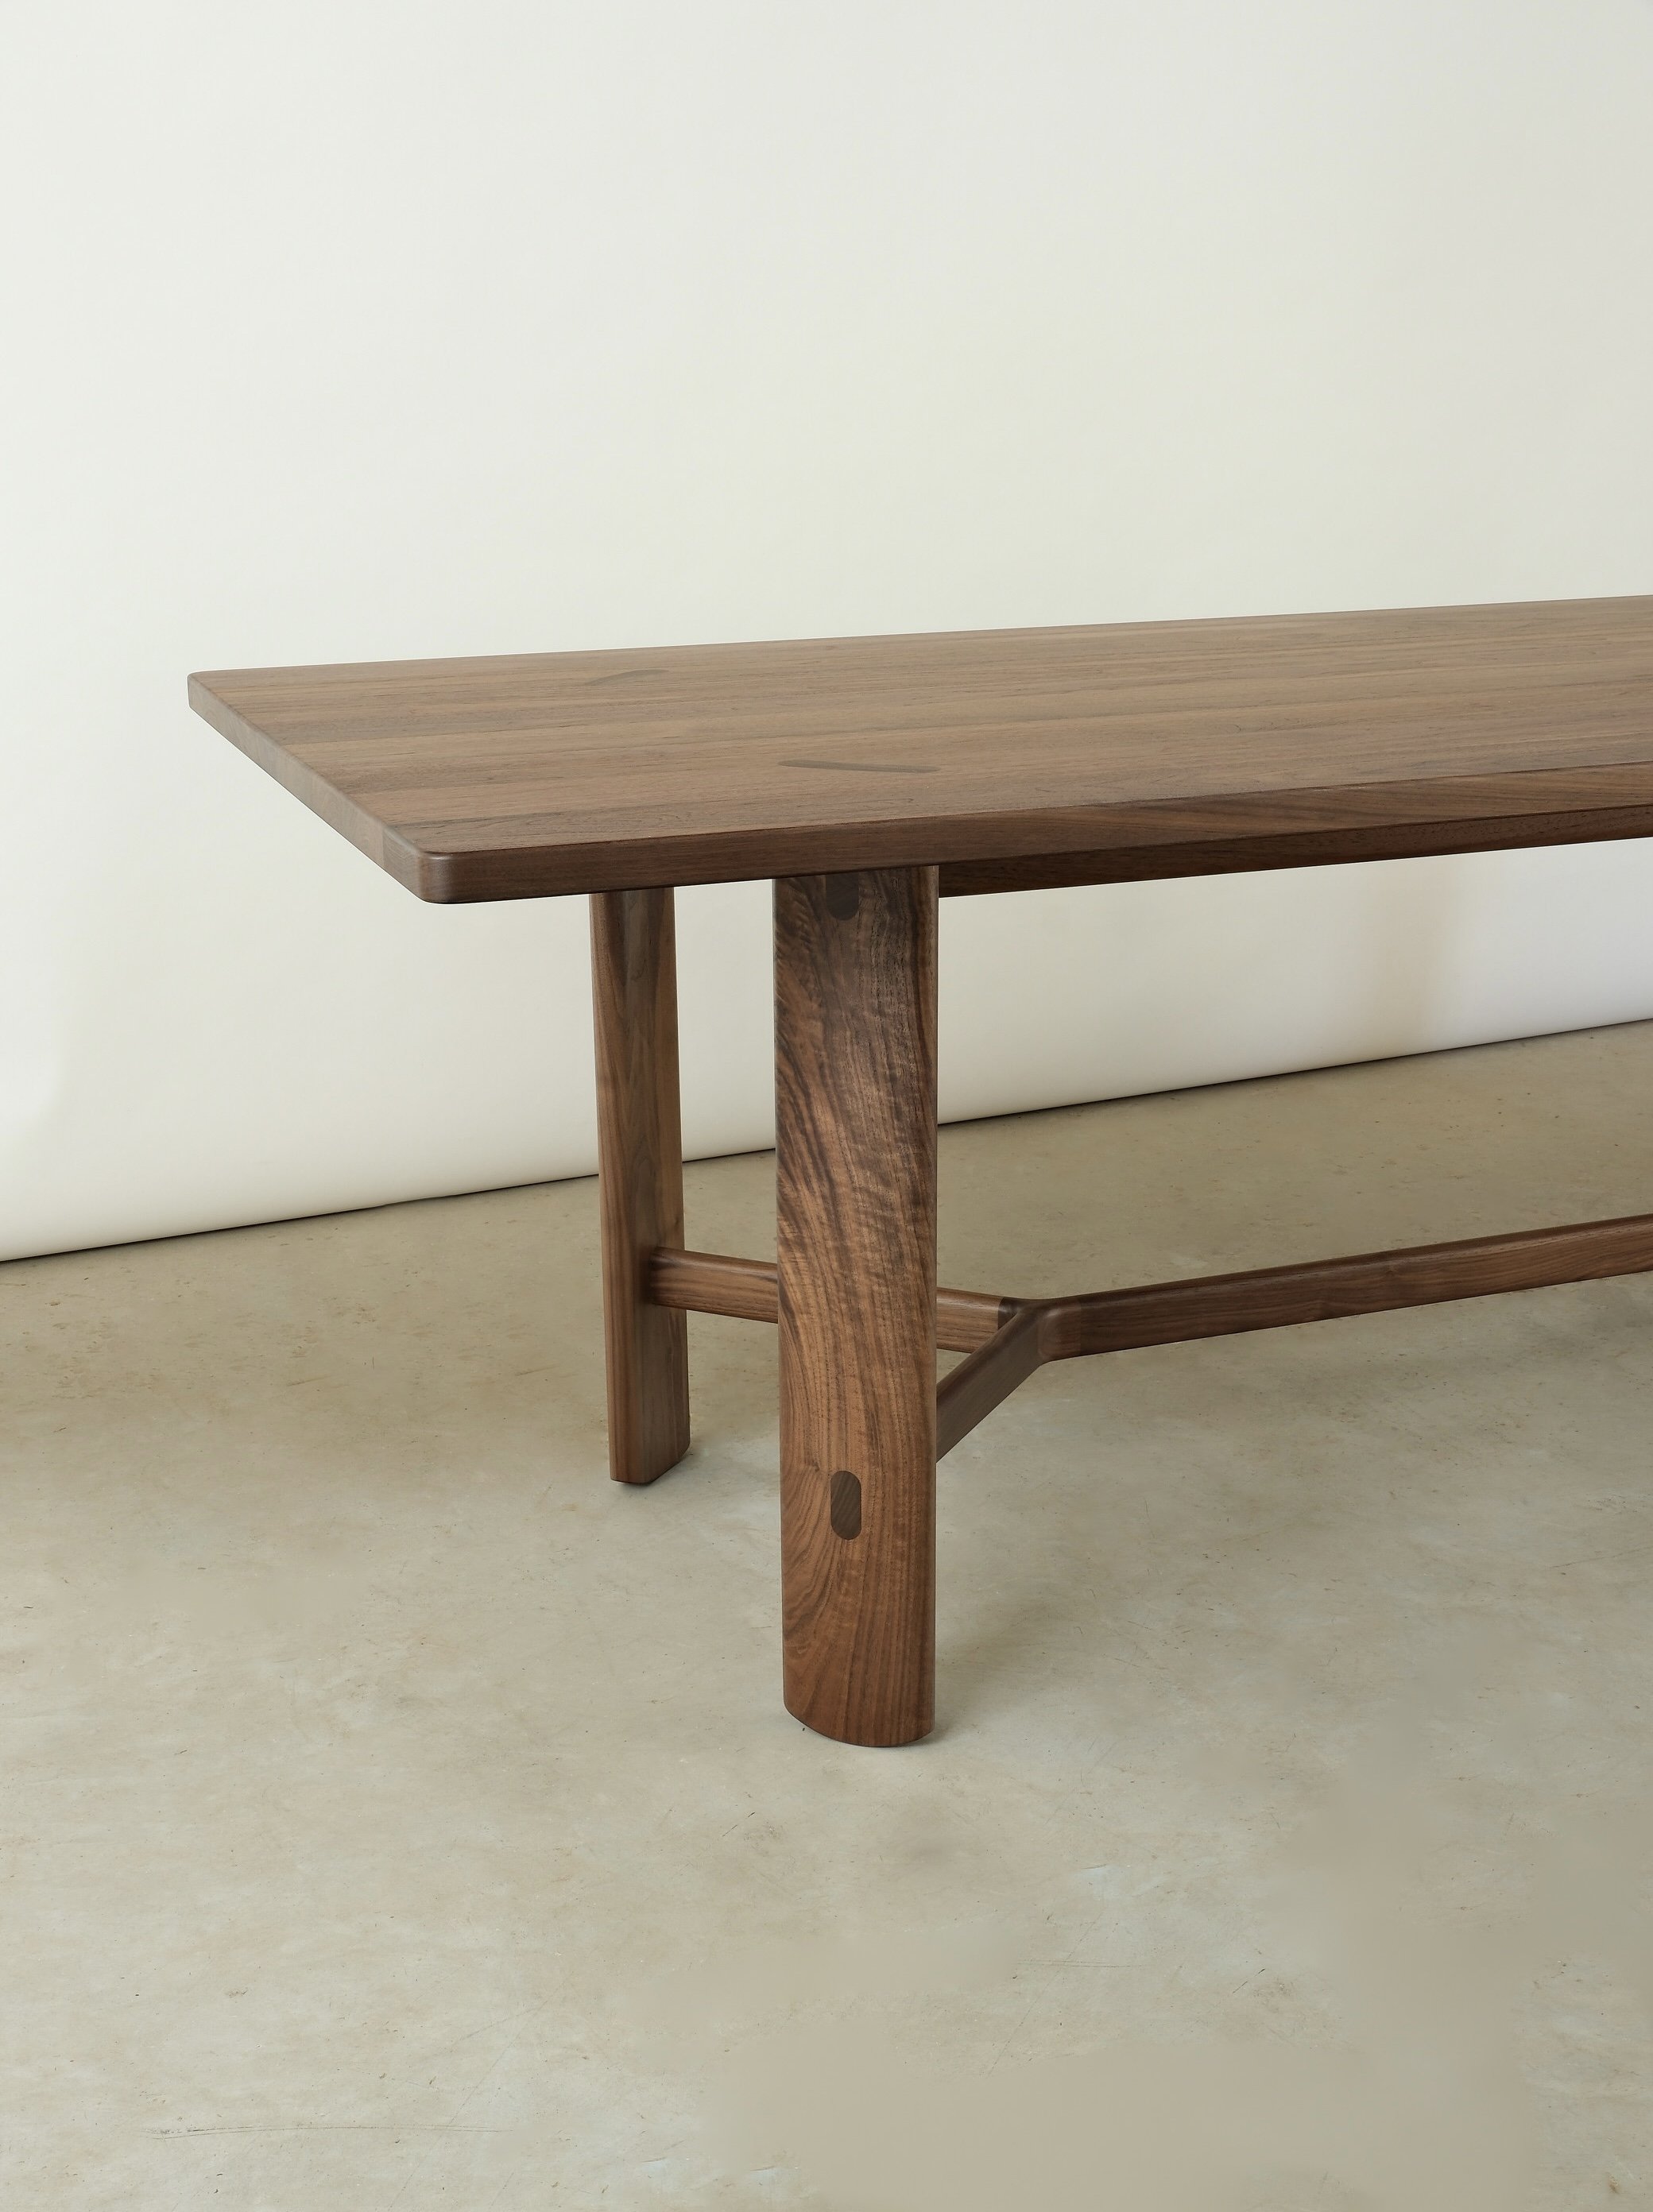 ghent dining table 3:4 detail view.jpg